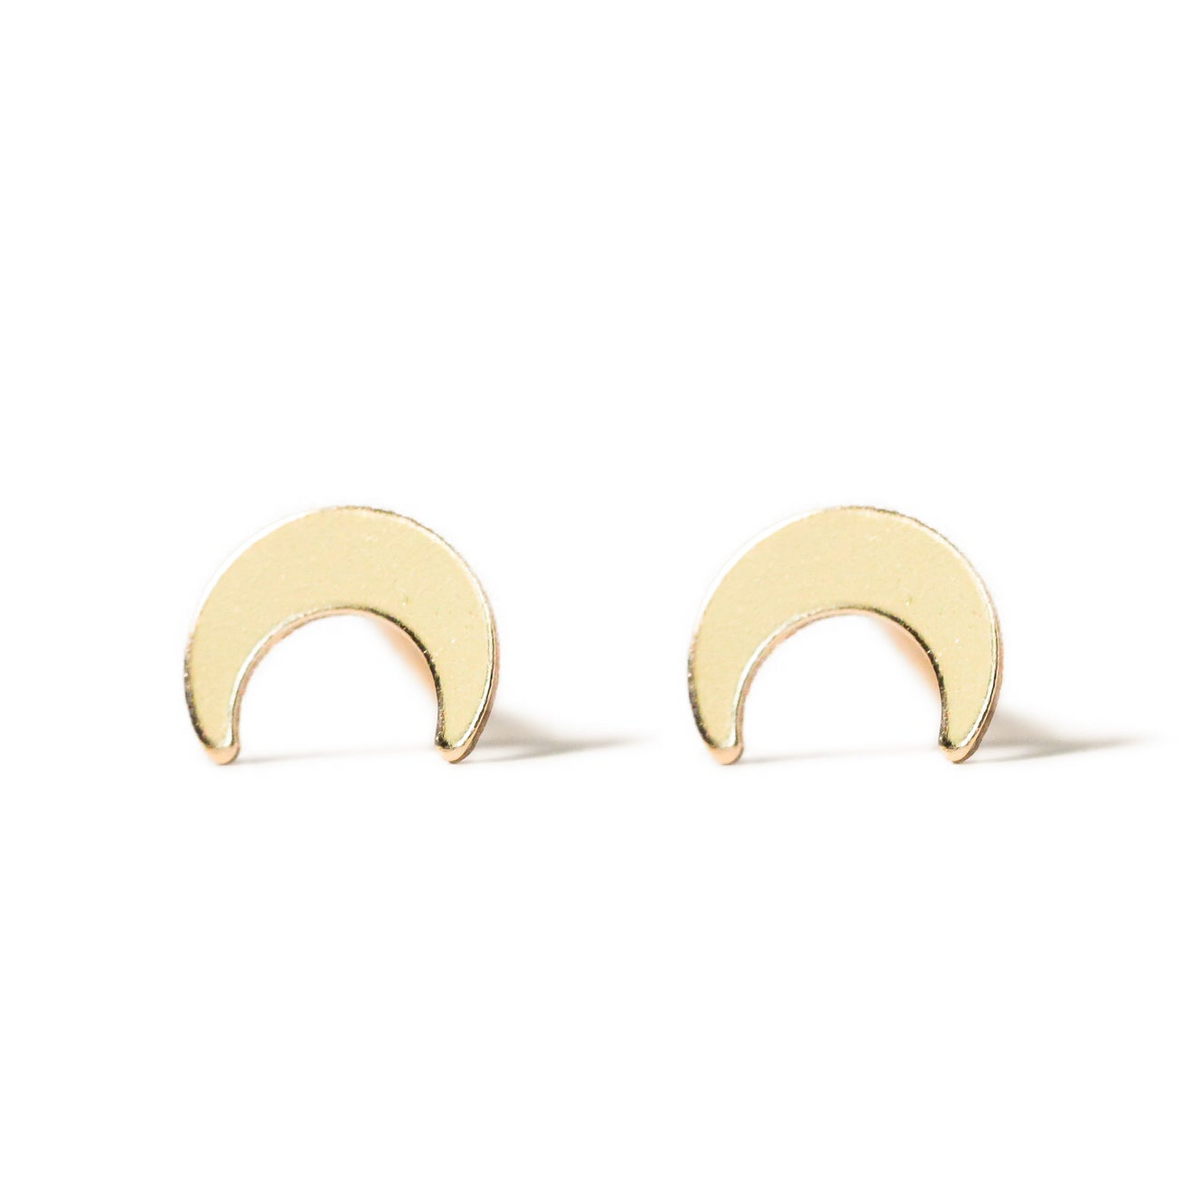 a pair of gold earrings with a crescent design